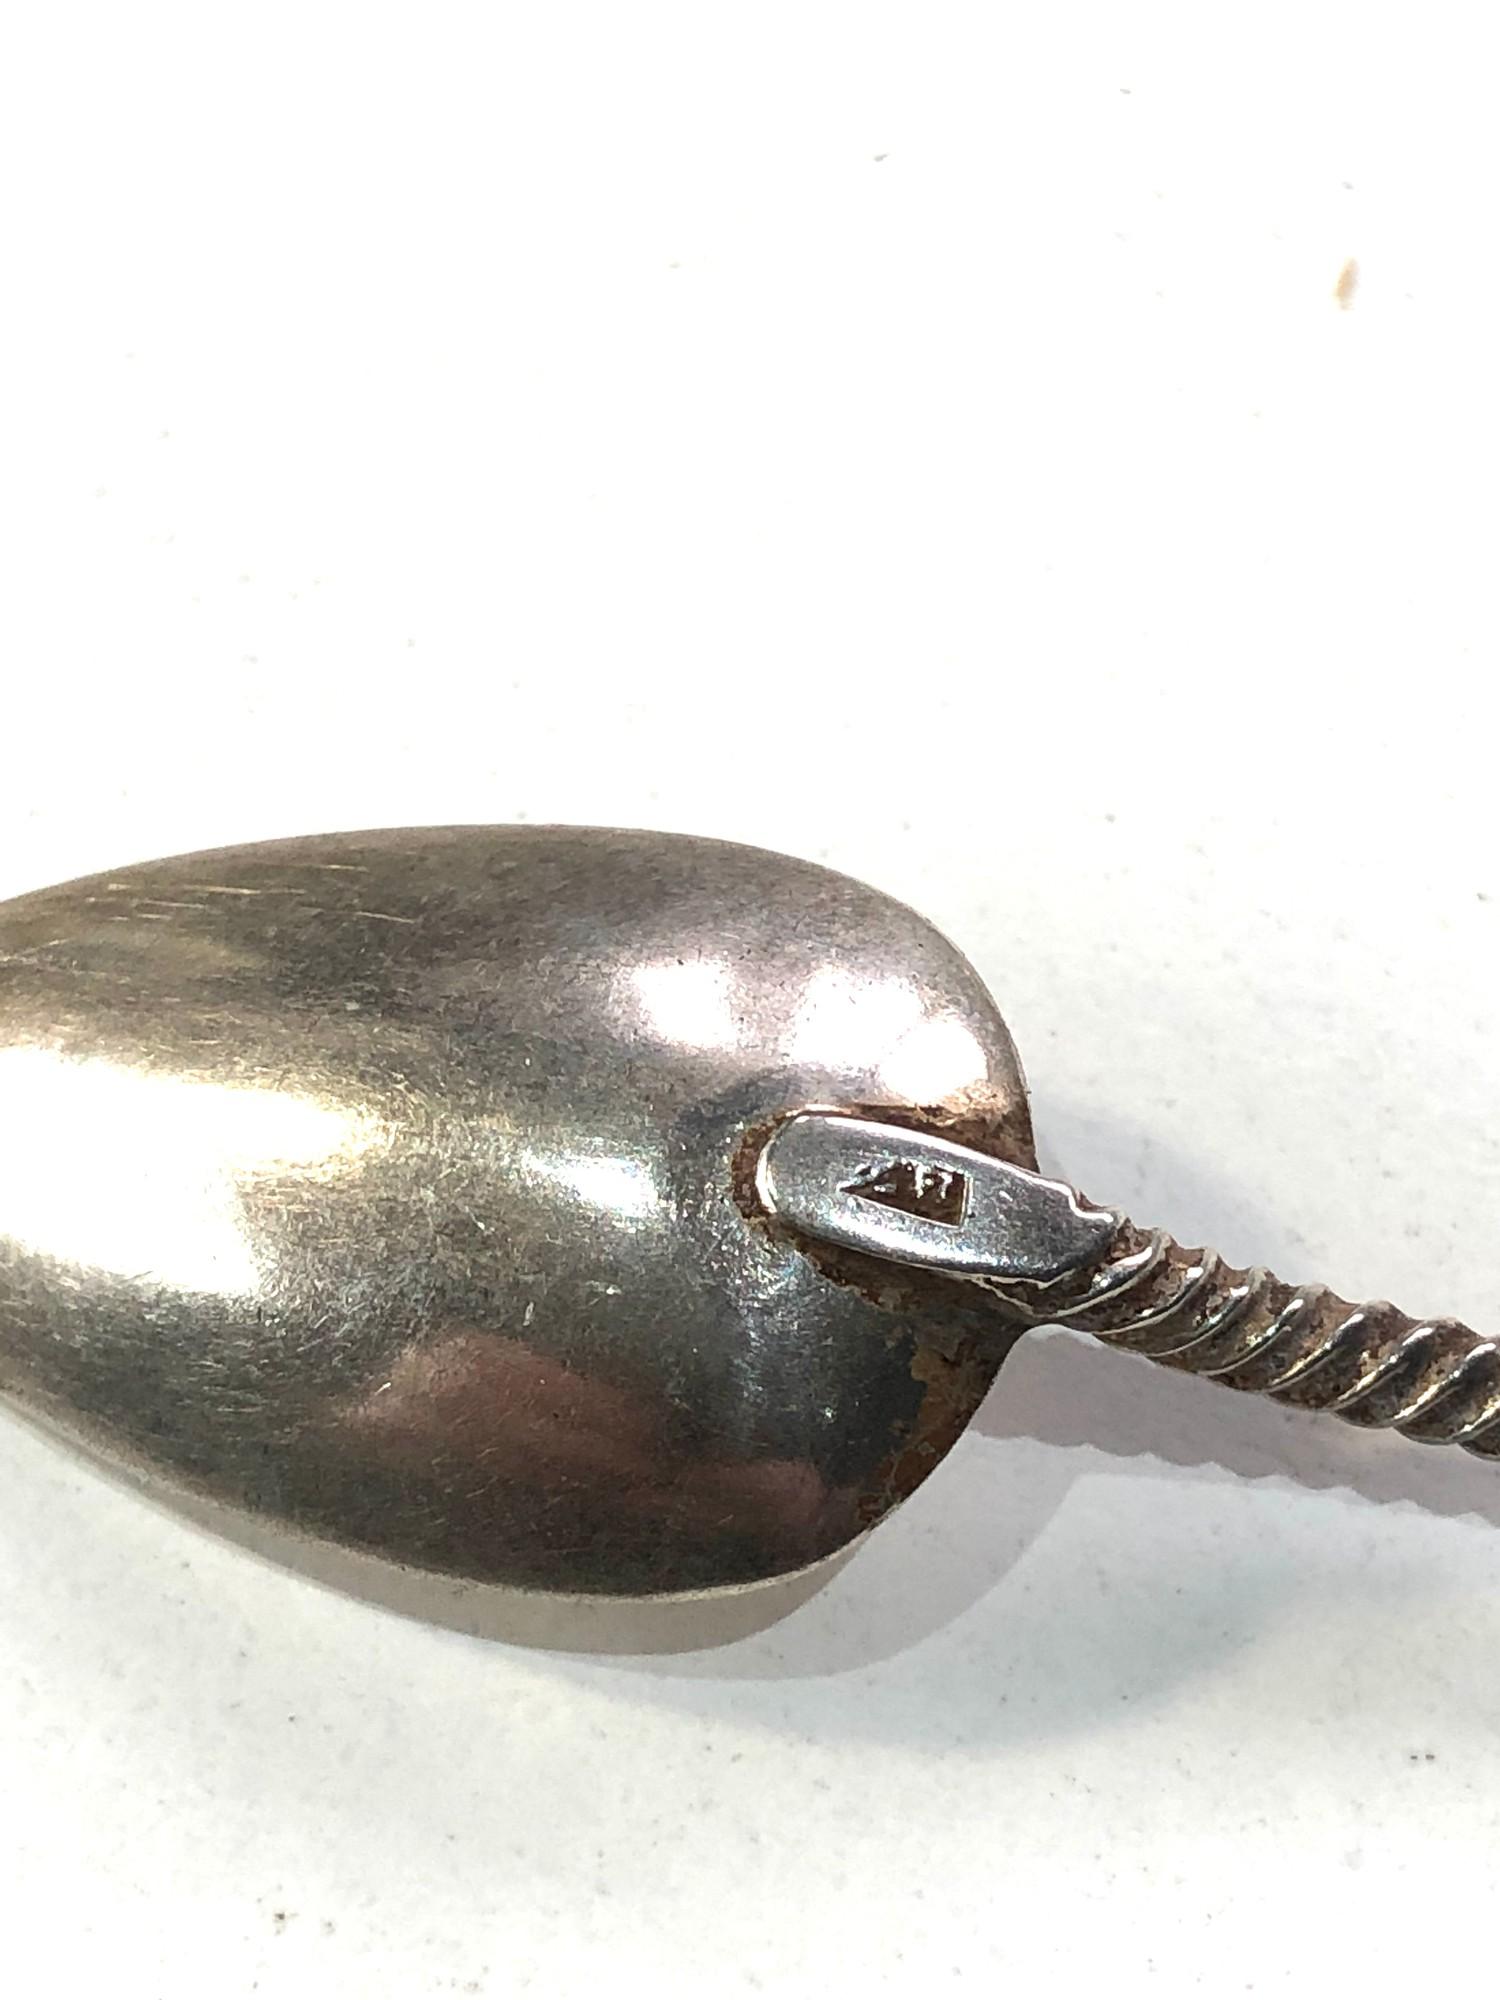 Set of 6 antique dutch silver coffee spoons acid tested as silver - Image 3 of 3